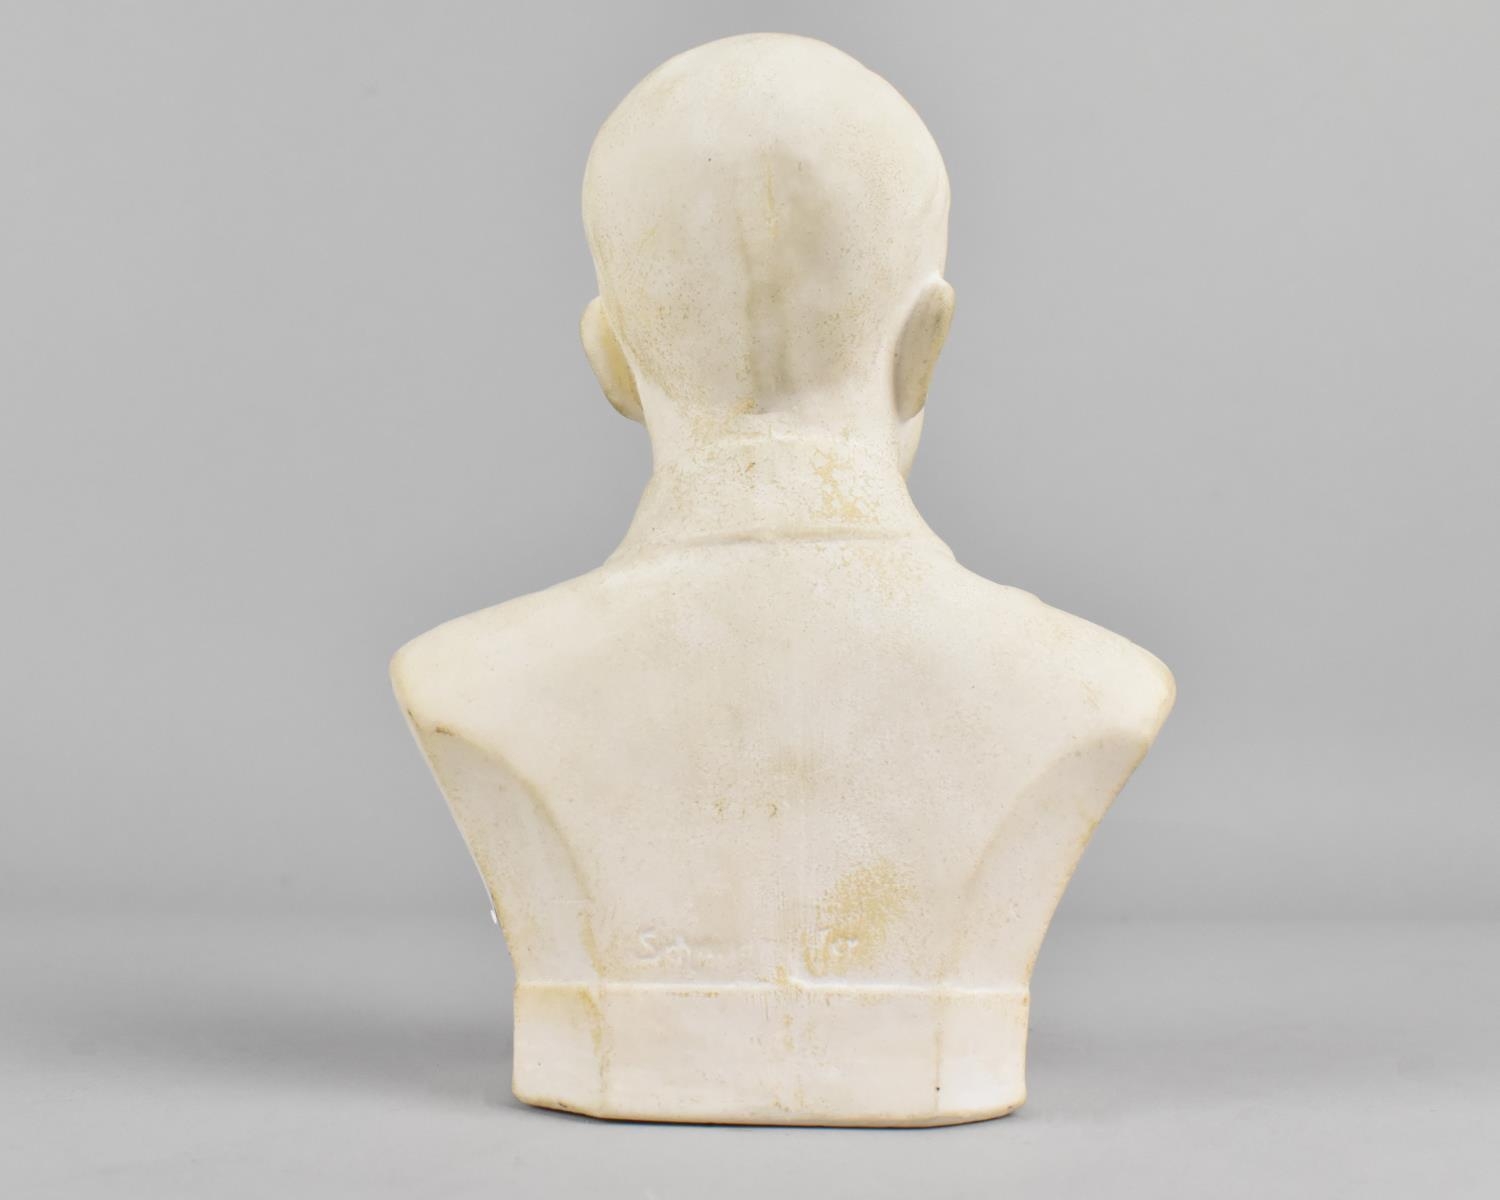 A Cast Reconstituted Stone Bust of Hitler, 17cms High - Image 3 of 3